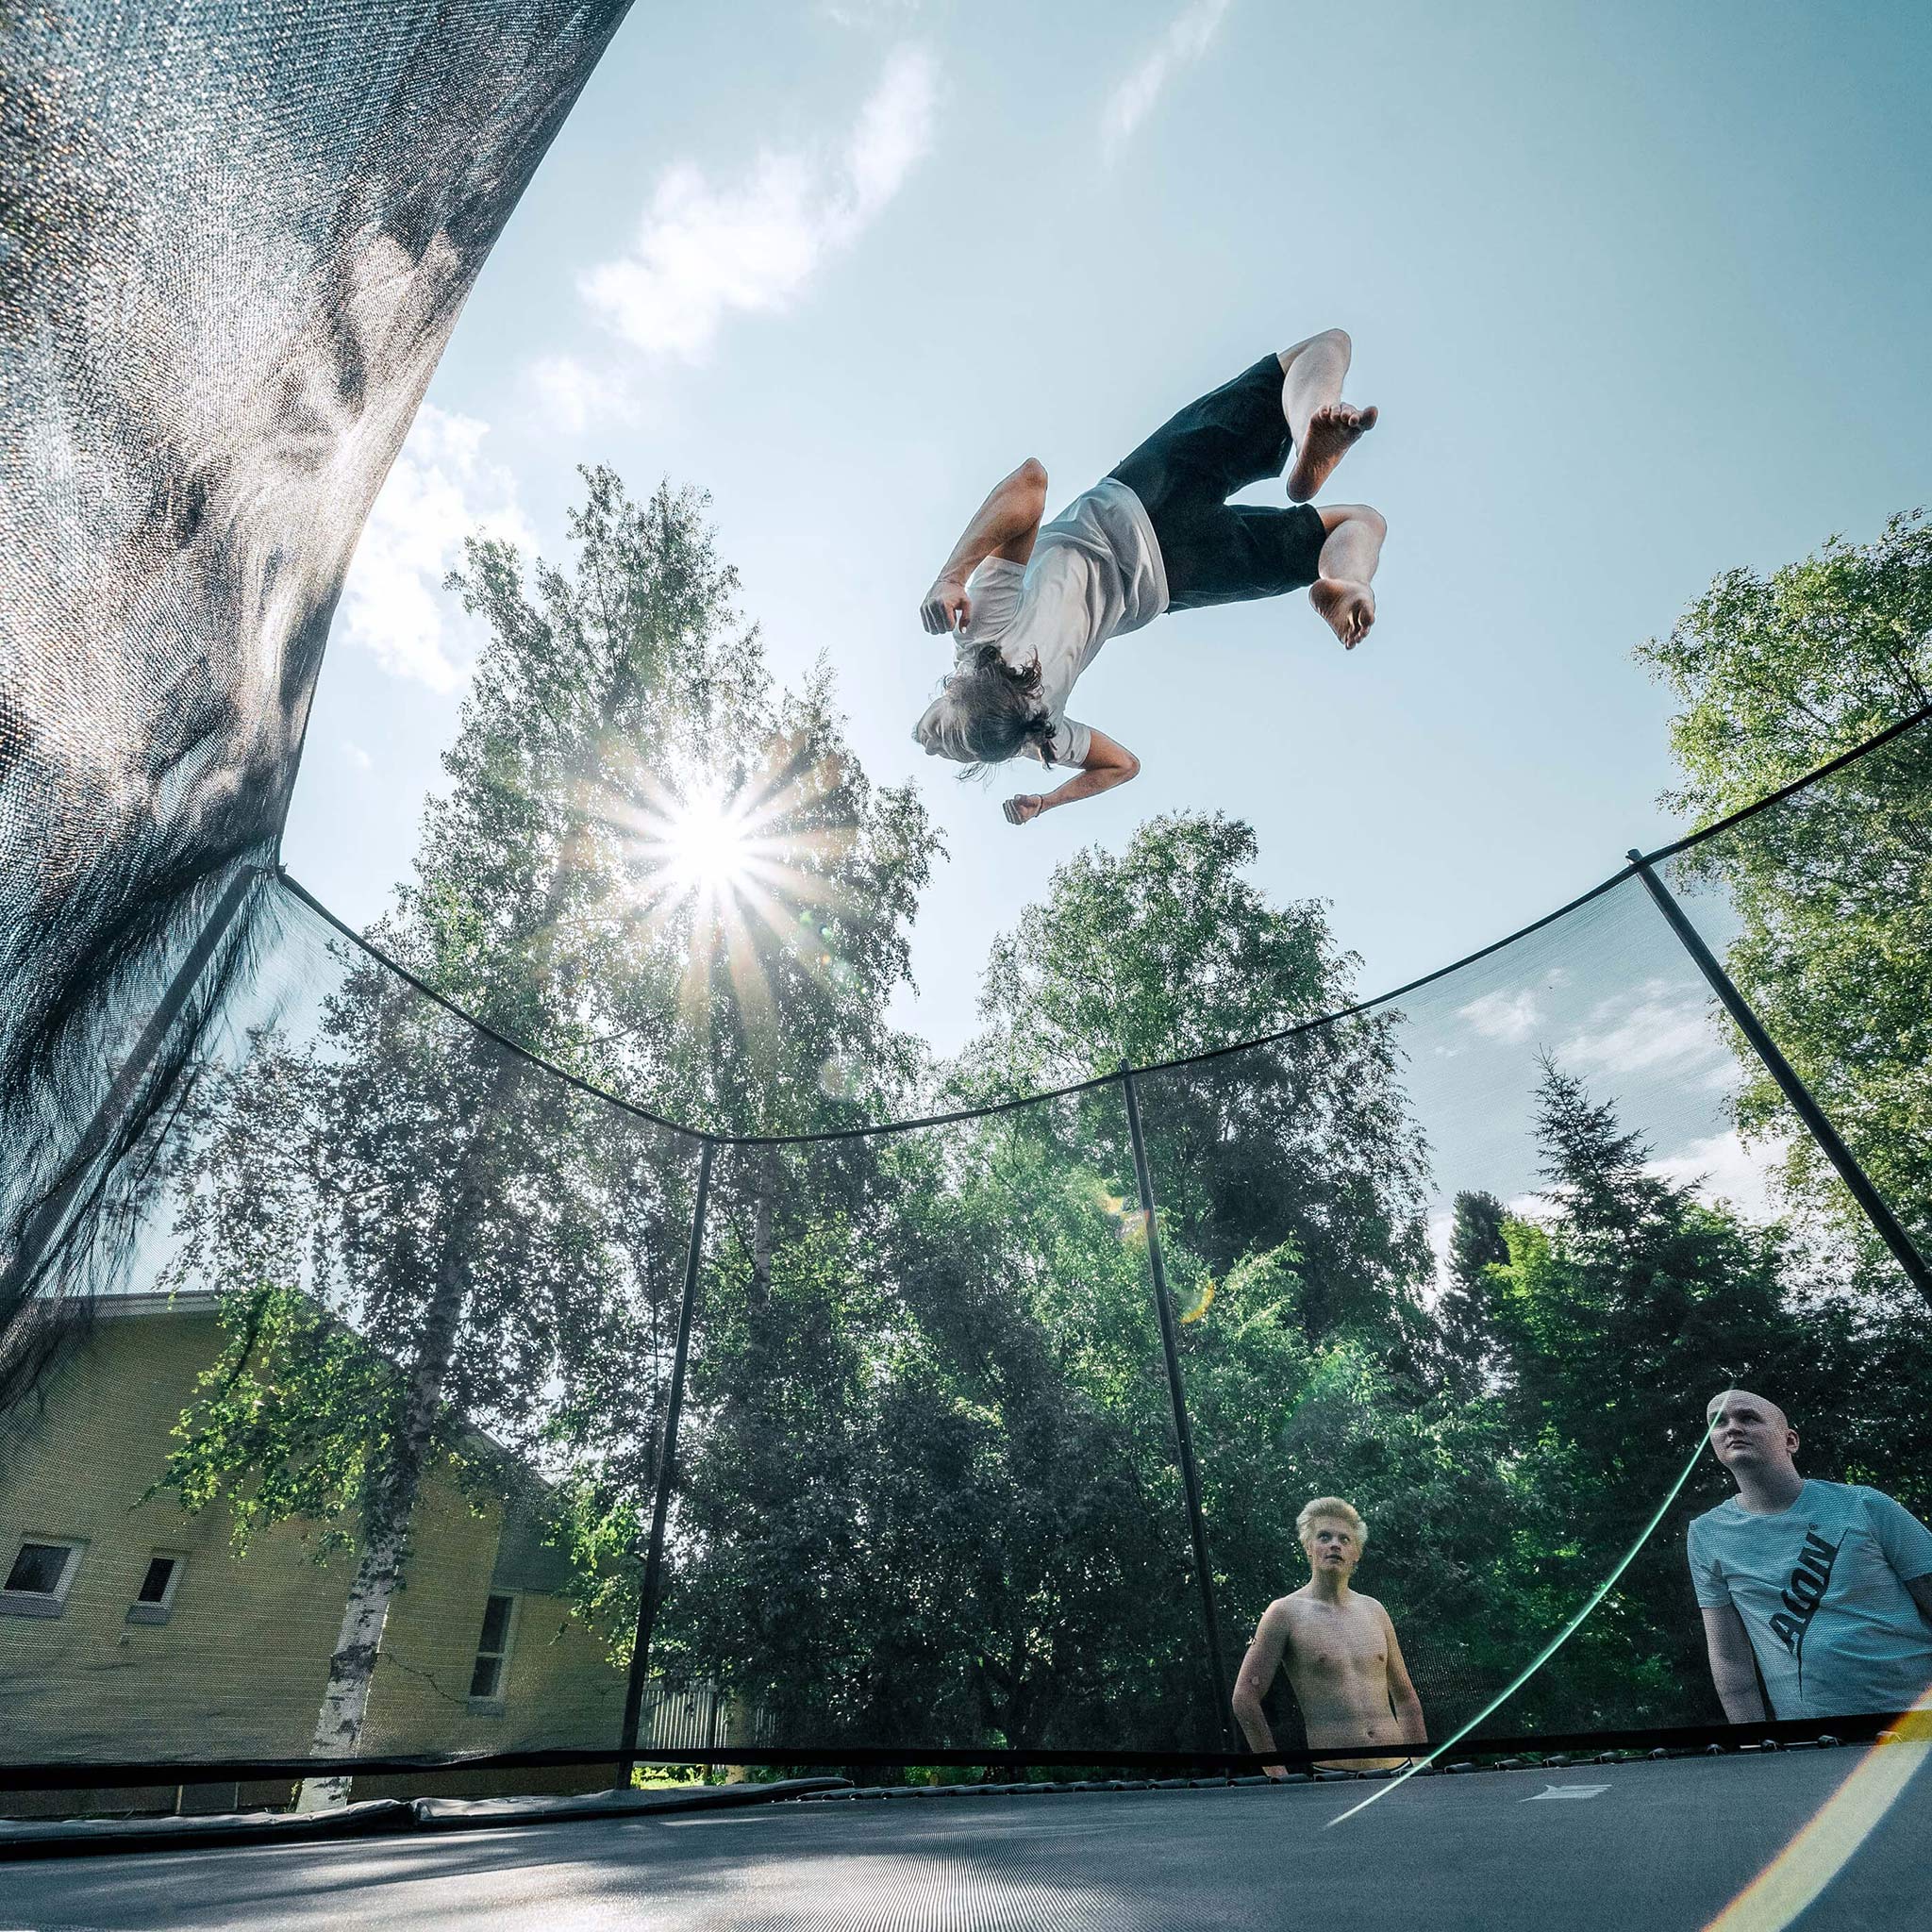 Trampoline trick on Acon Air 16 Sport HD Performance trampoline, guys are watching.